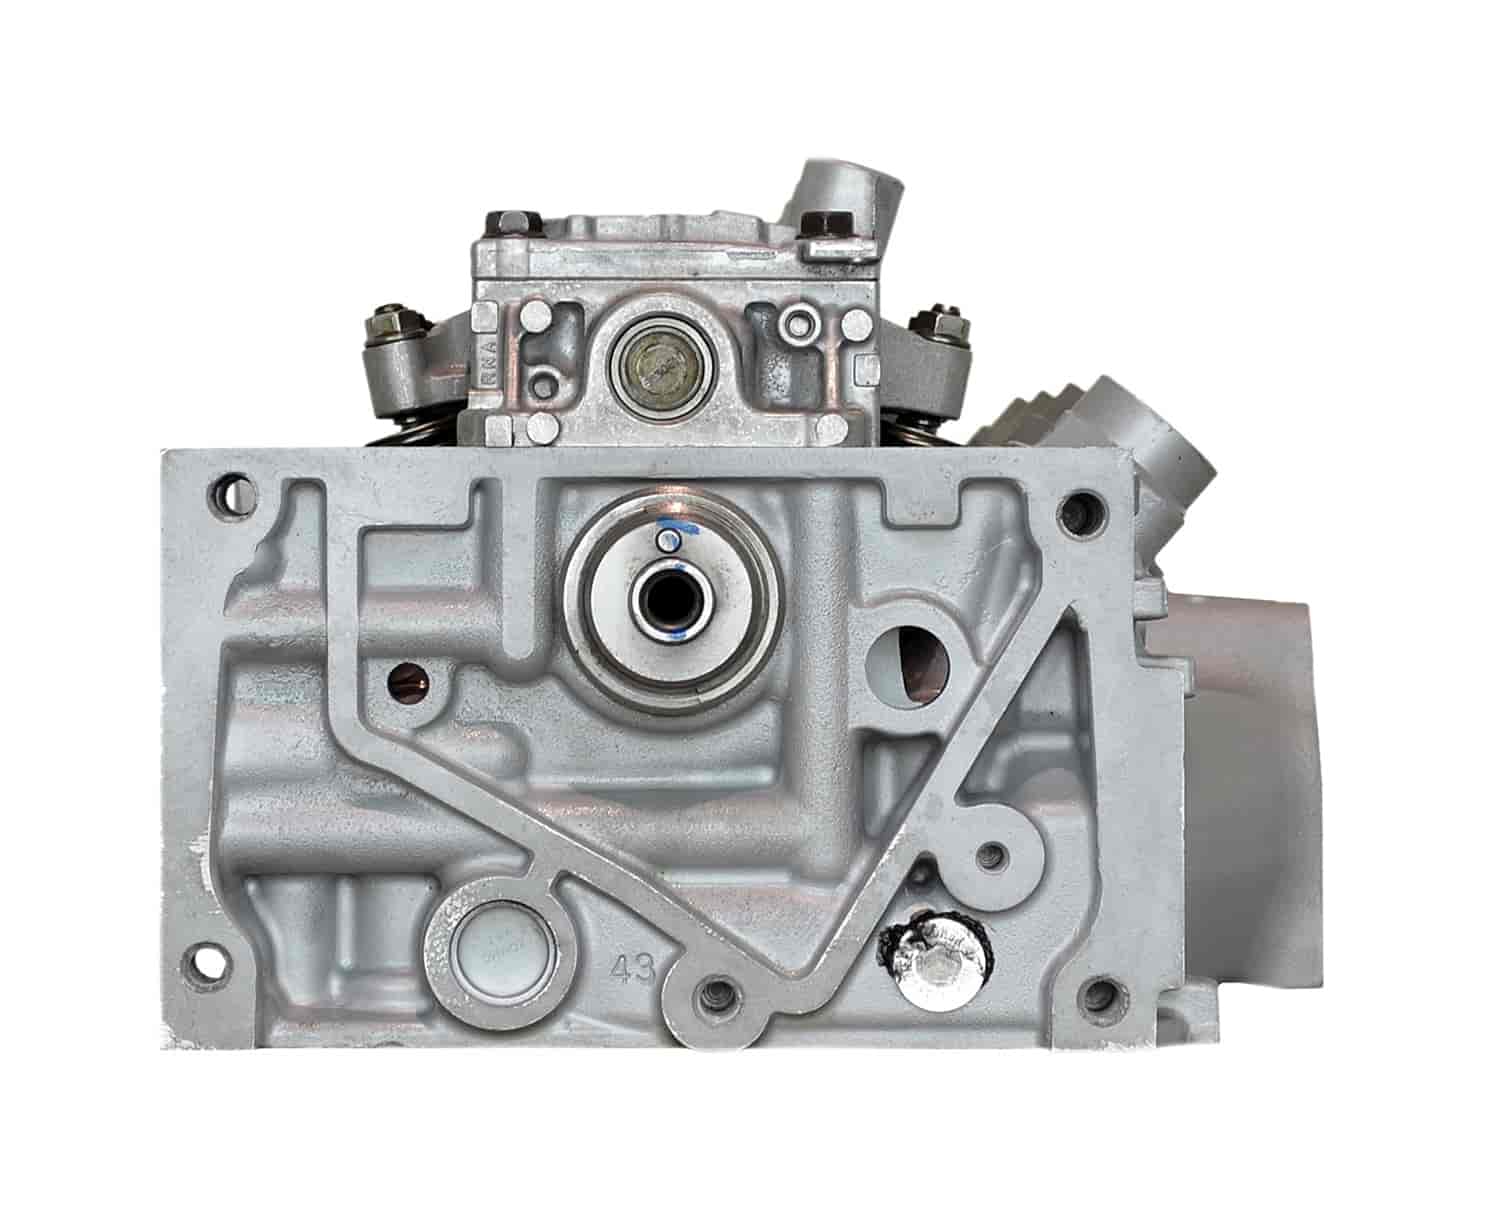 Remanufactured Cylinder Head for 2006-2011 Honda Civic with